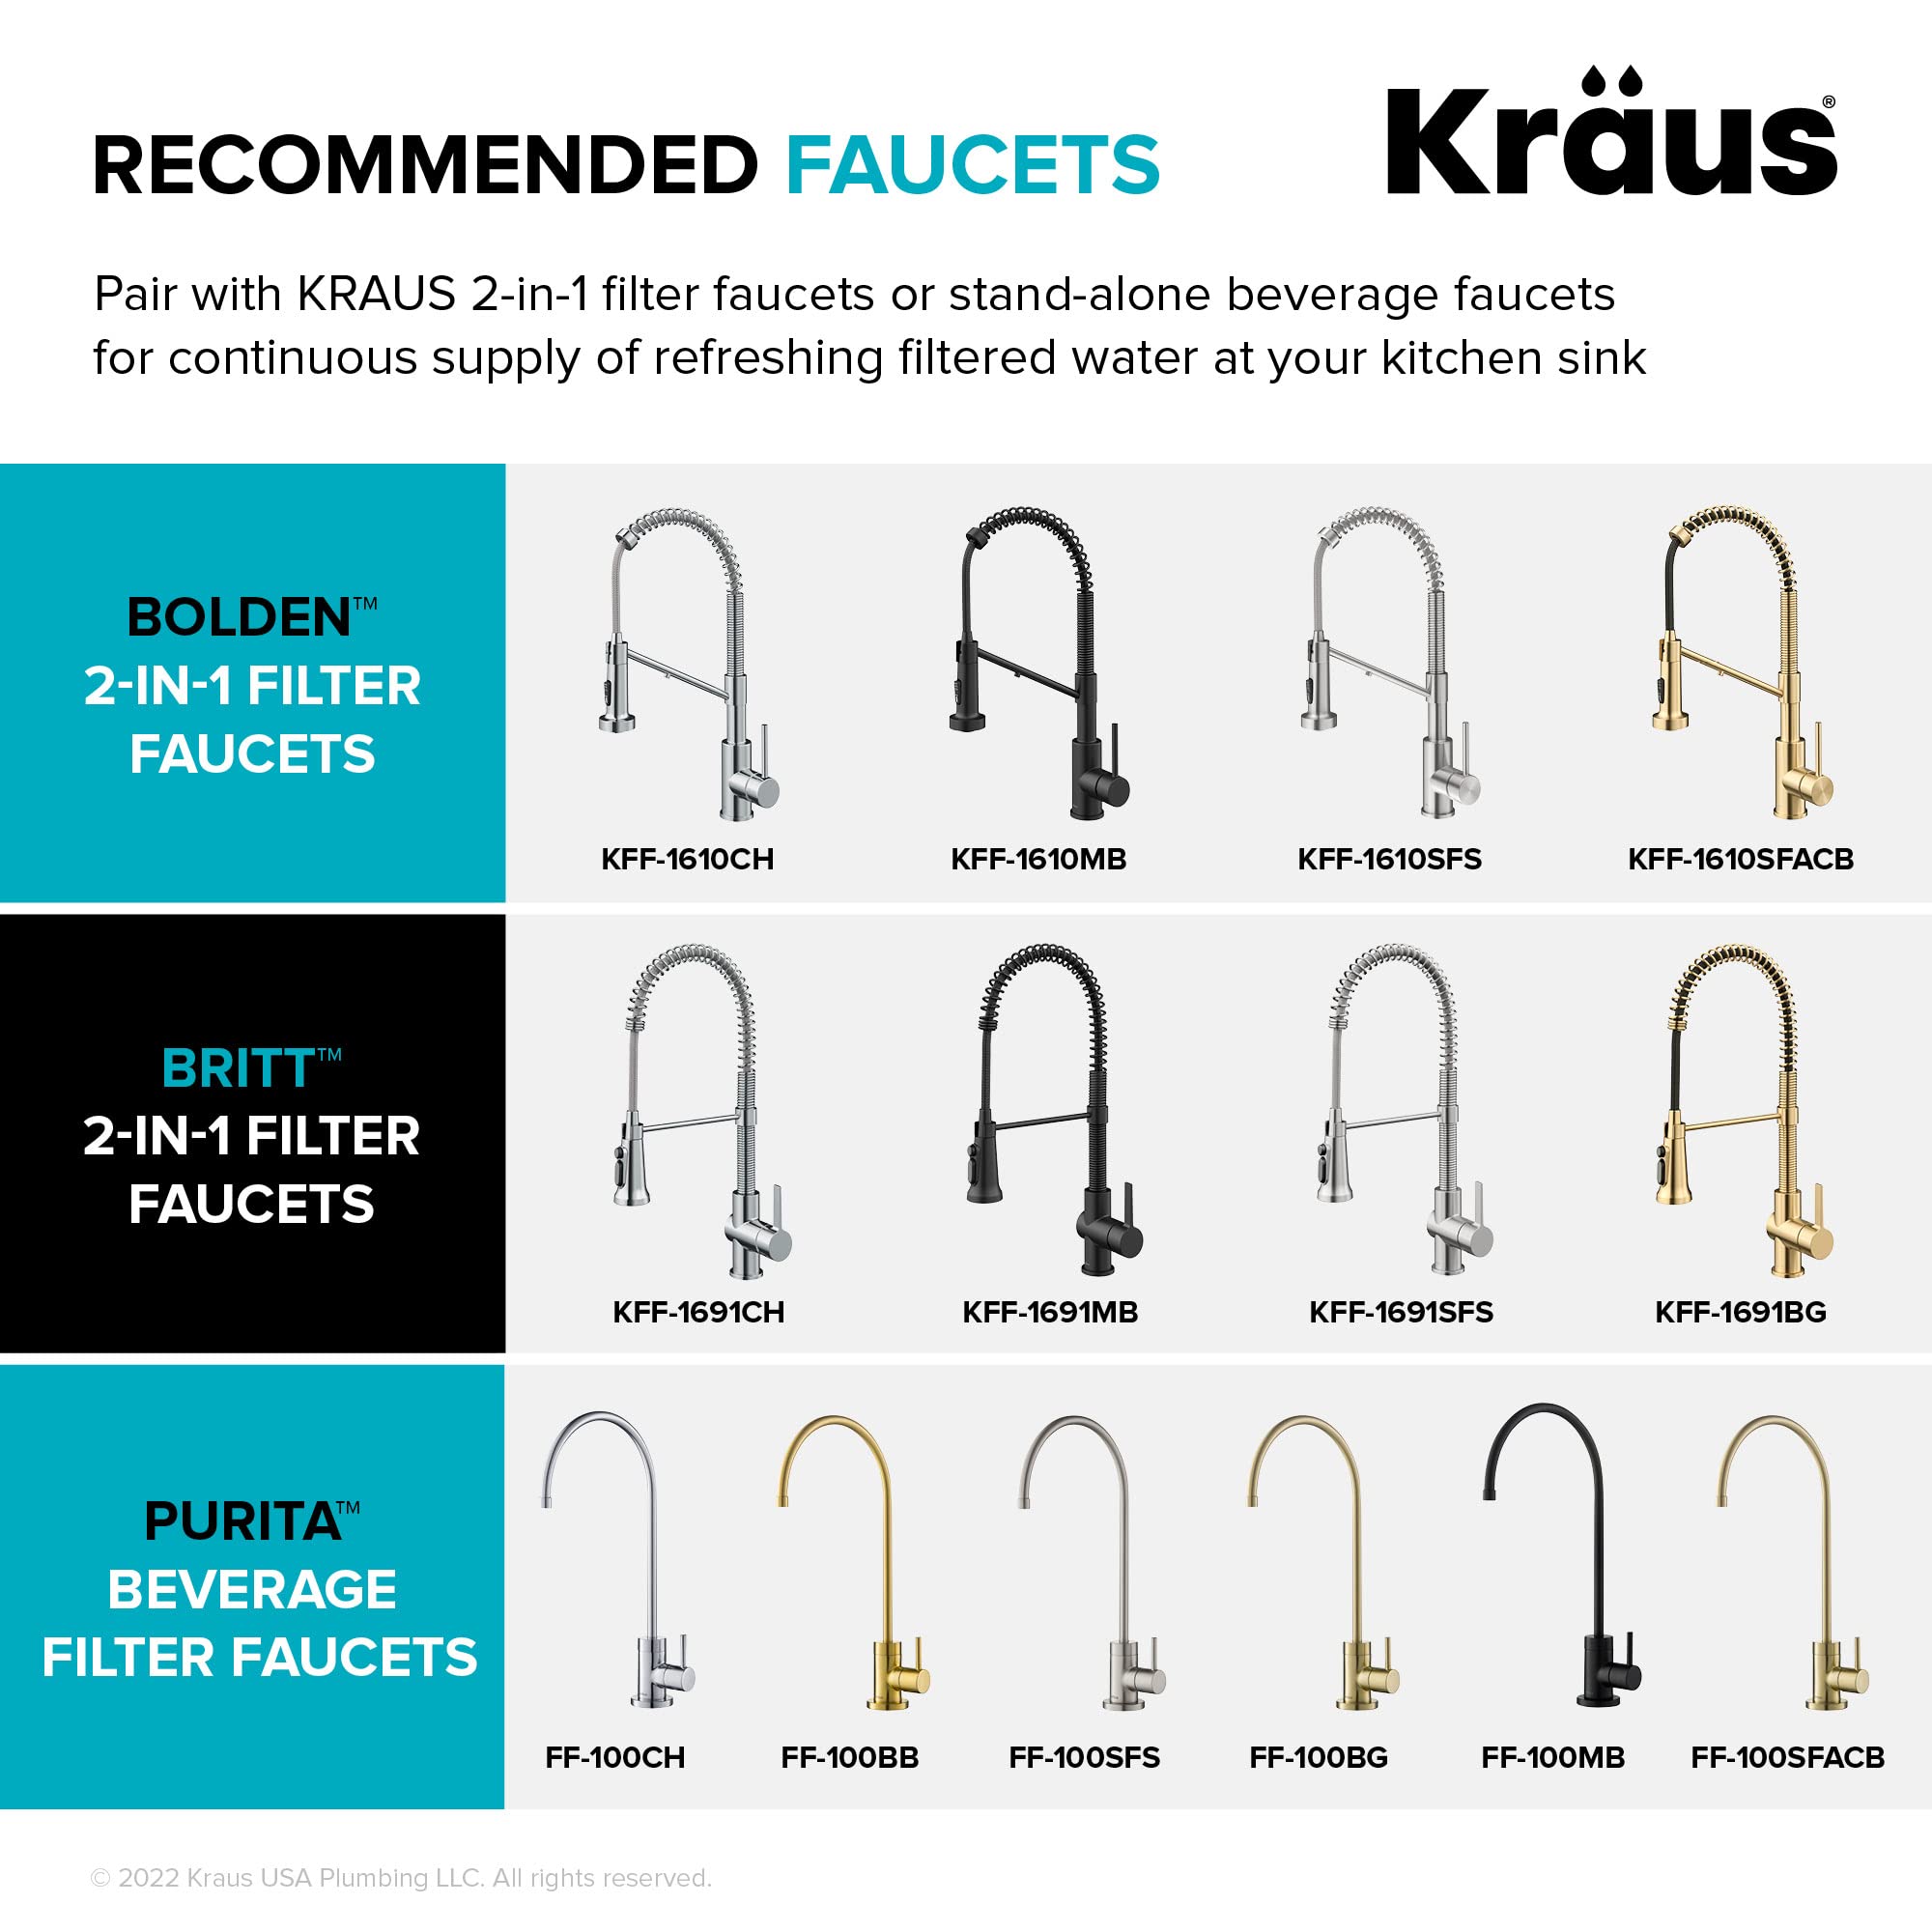 KRAUS Purita 2-Stage Carbon Block Under-Sink Water Filtration System with Digital Display Monitor, FS-1000, White